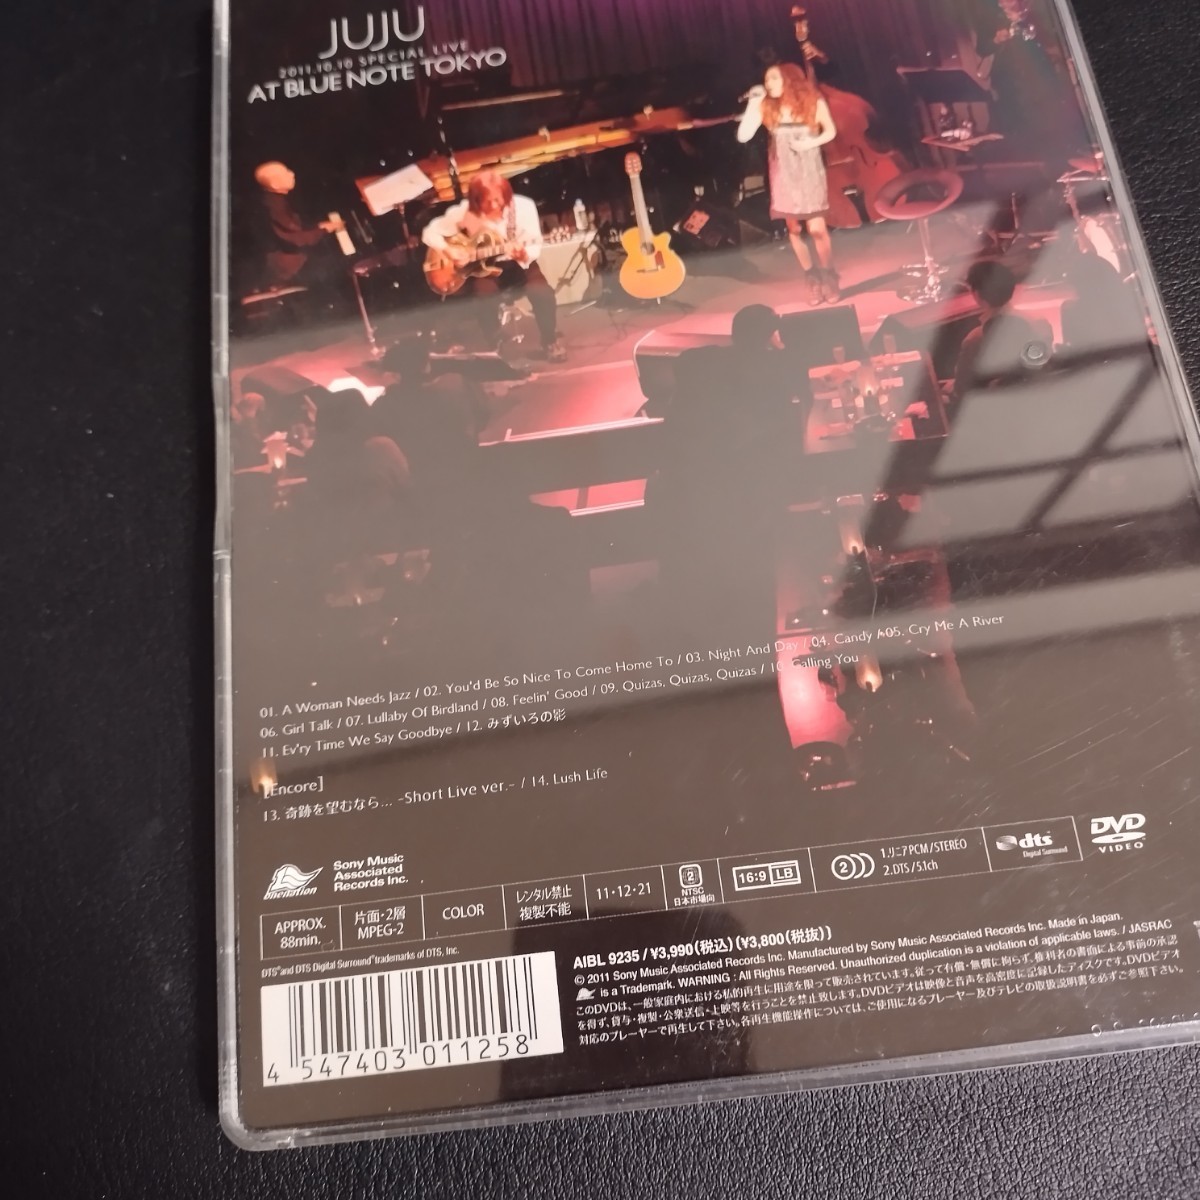 【JUJU】2011.10.10 SPECIAL LIVE AT BLUE NOTE TOKYO 邦楽DVD 棚Eの画像3